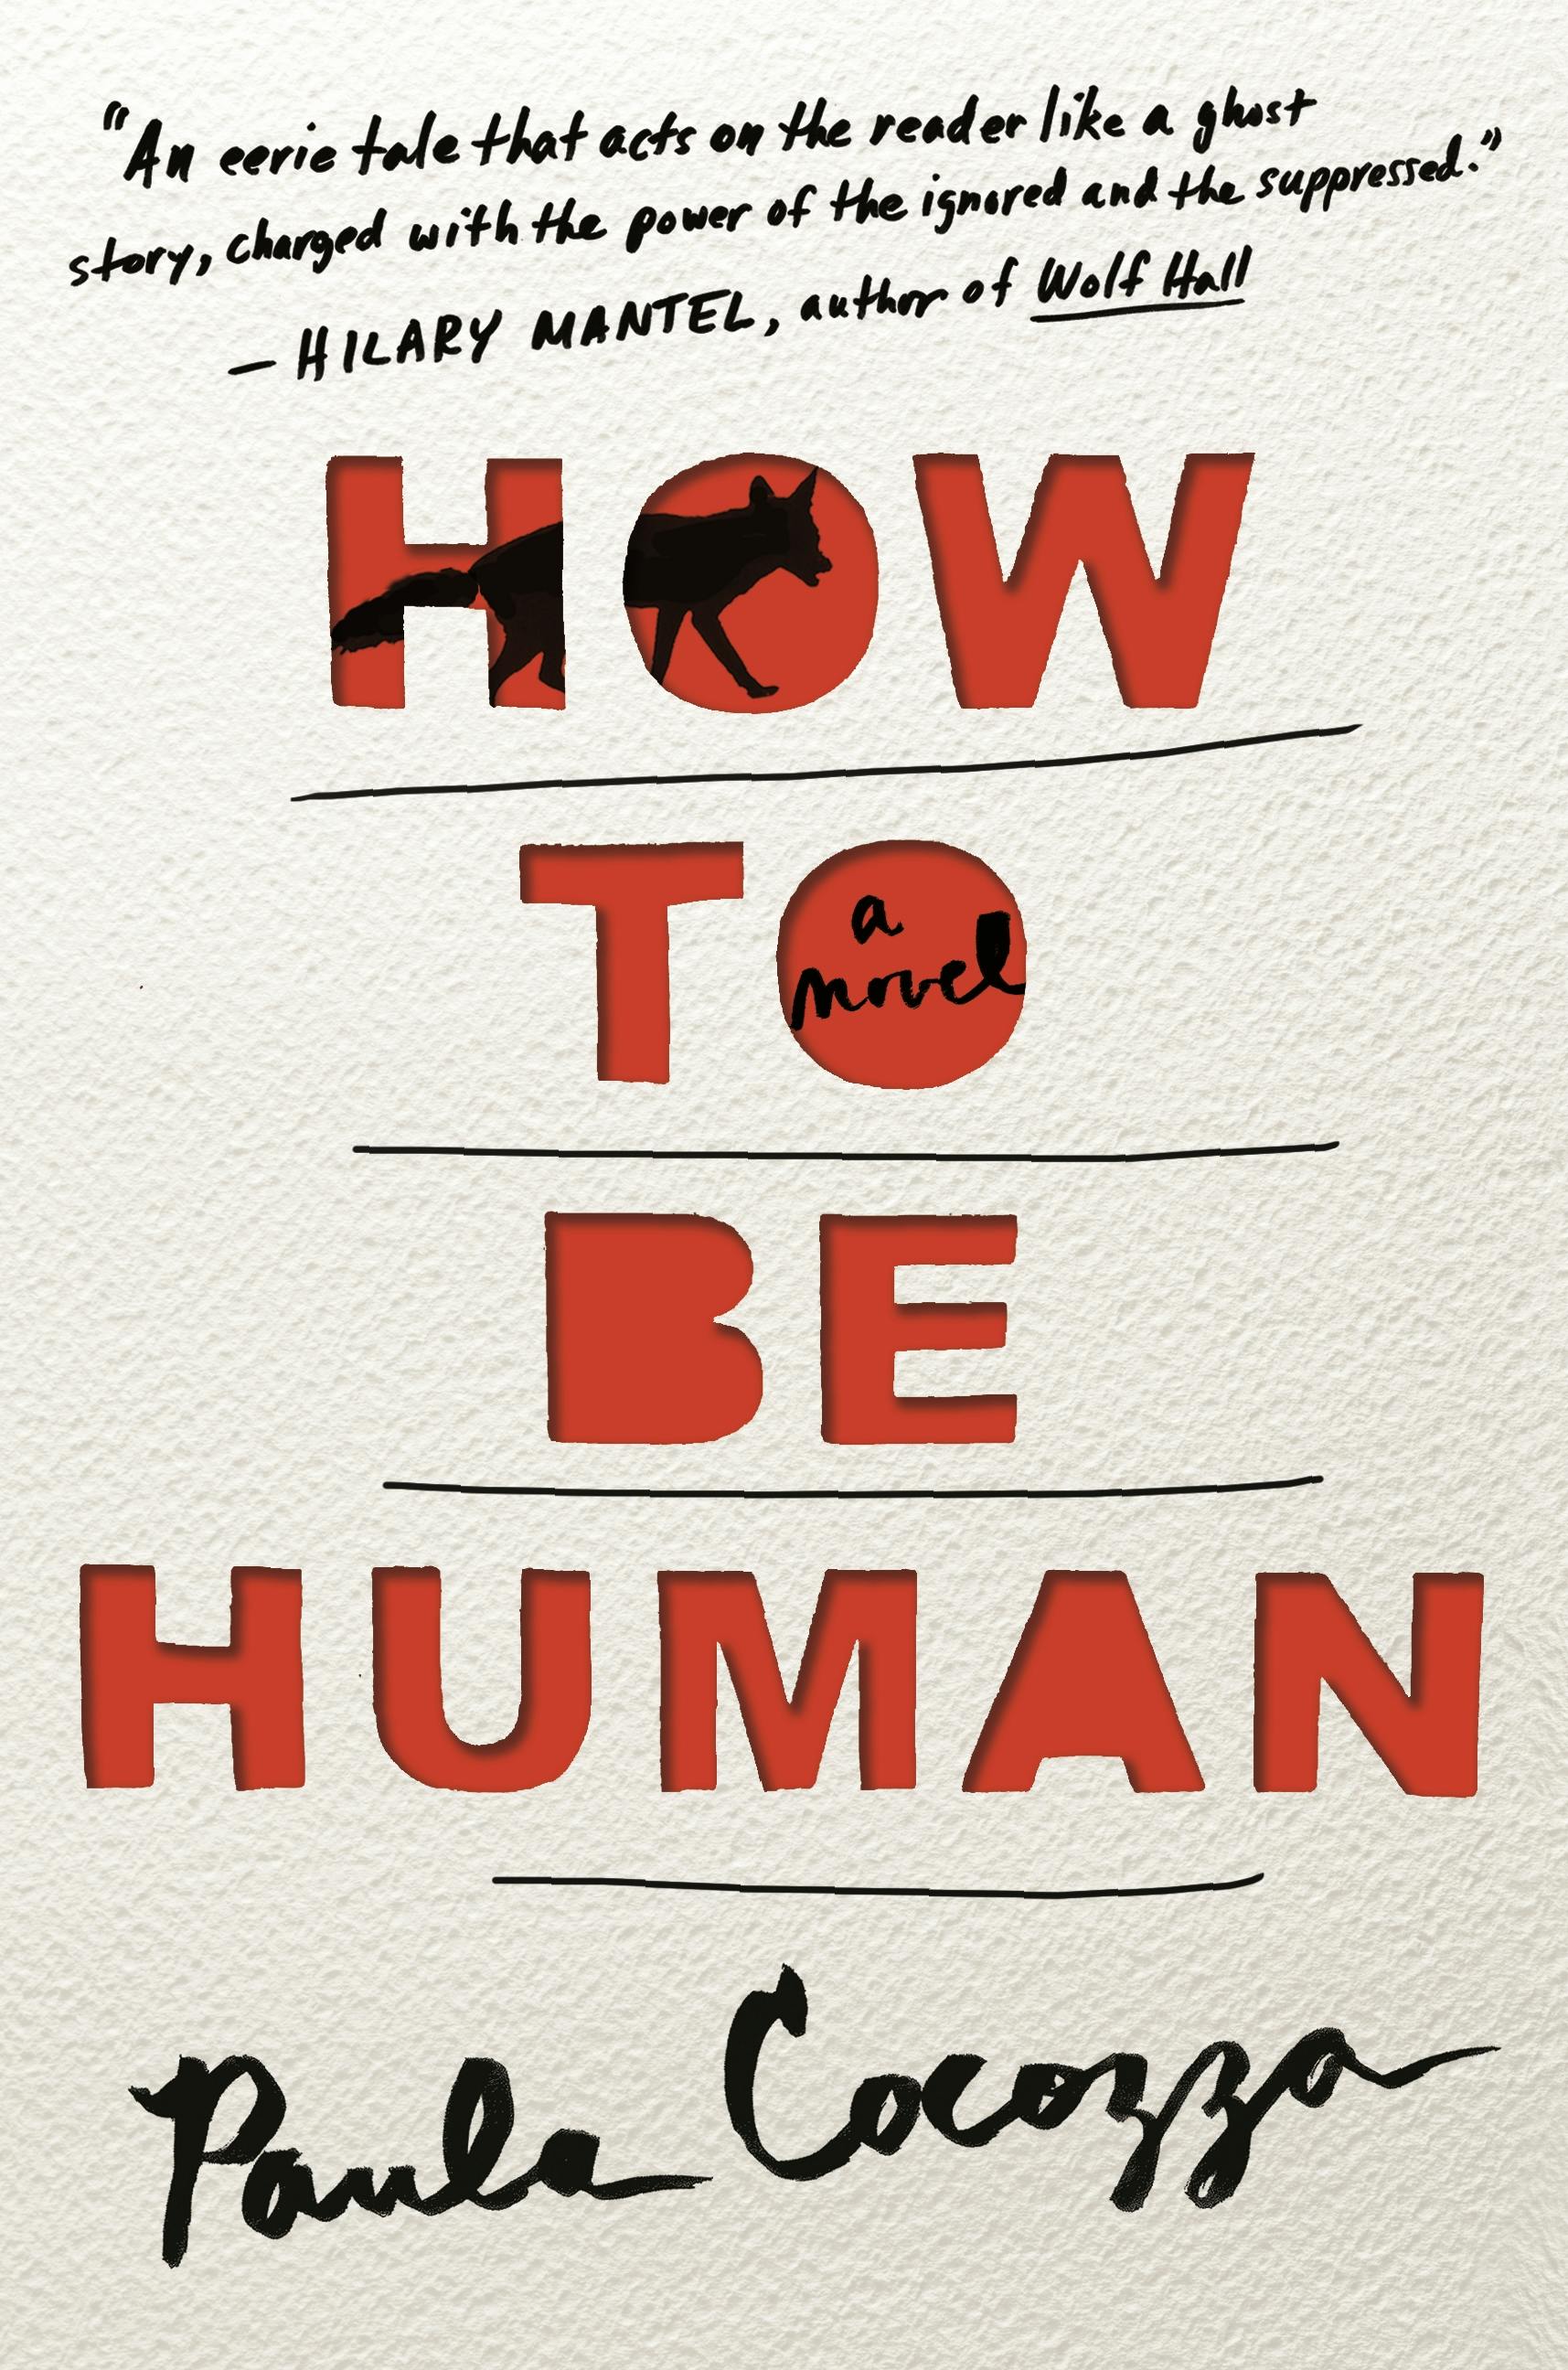 Be How to Human